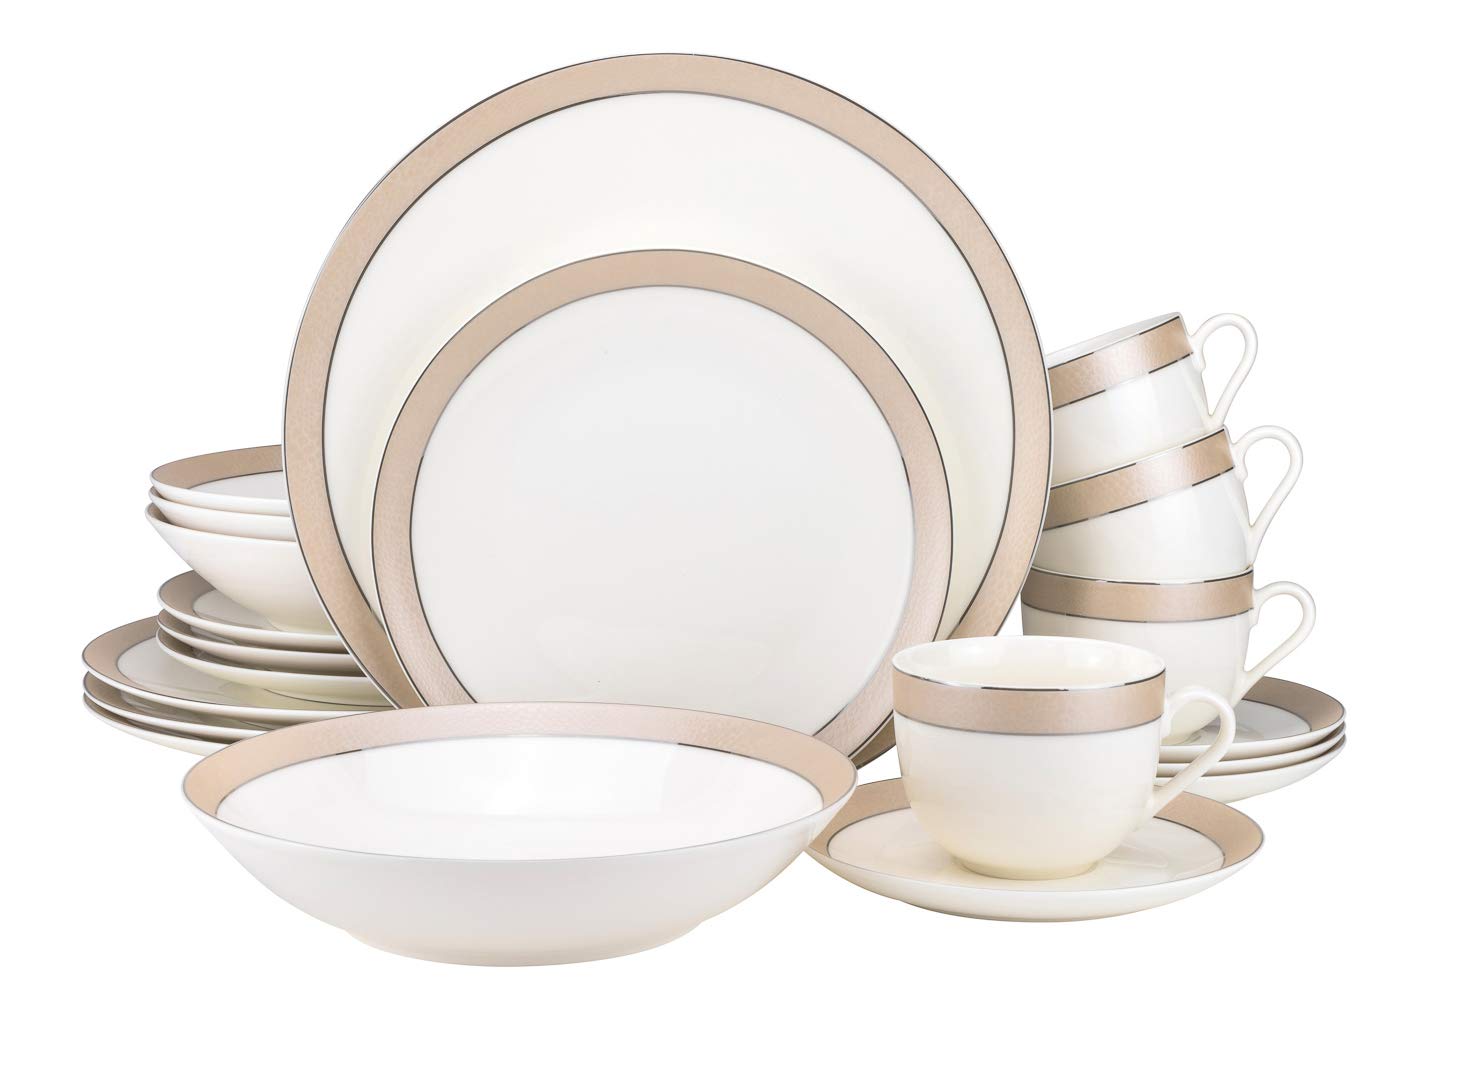 20-pc. Dinner Set Service for 4, 24K Gold-plated Luxury Bone China Tableware ("Downtown" 1402P) - image 1 of 2